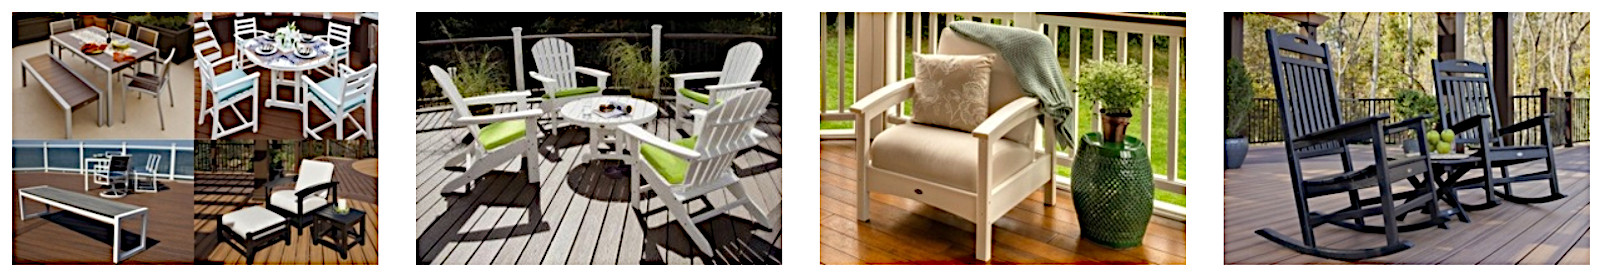 Quality Trex outdoor furniture